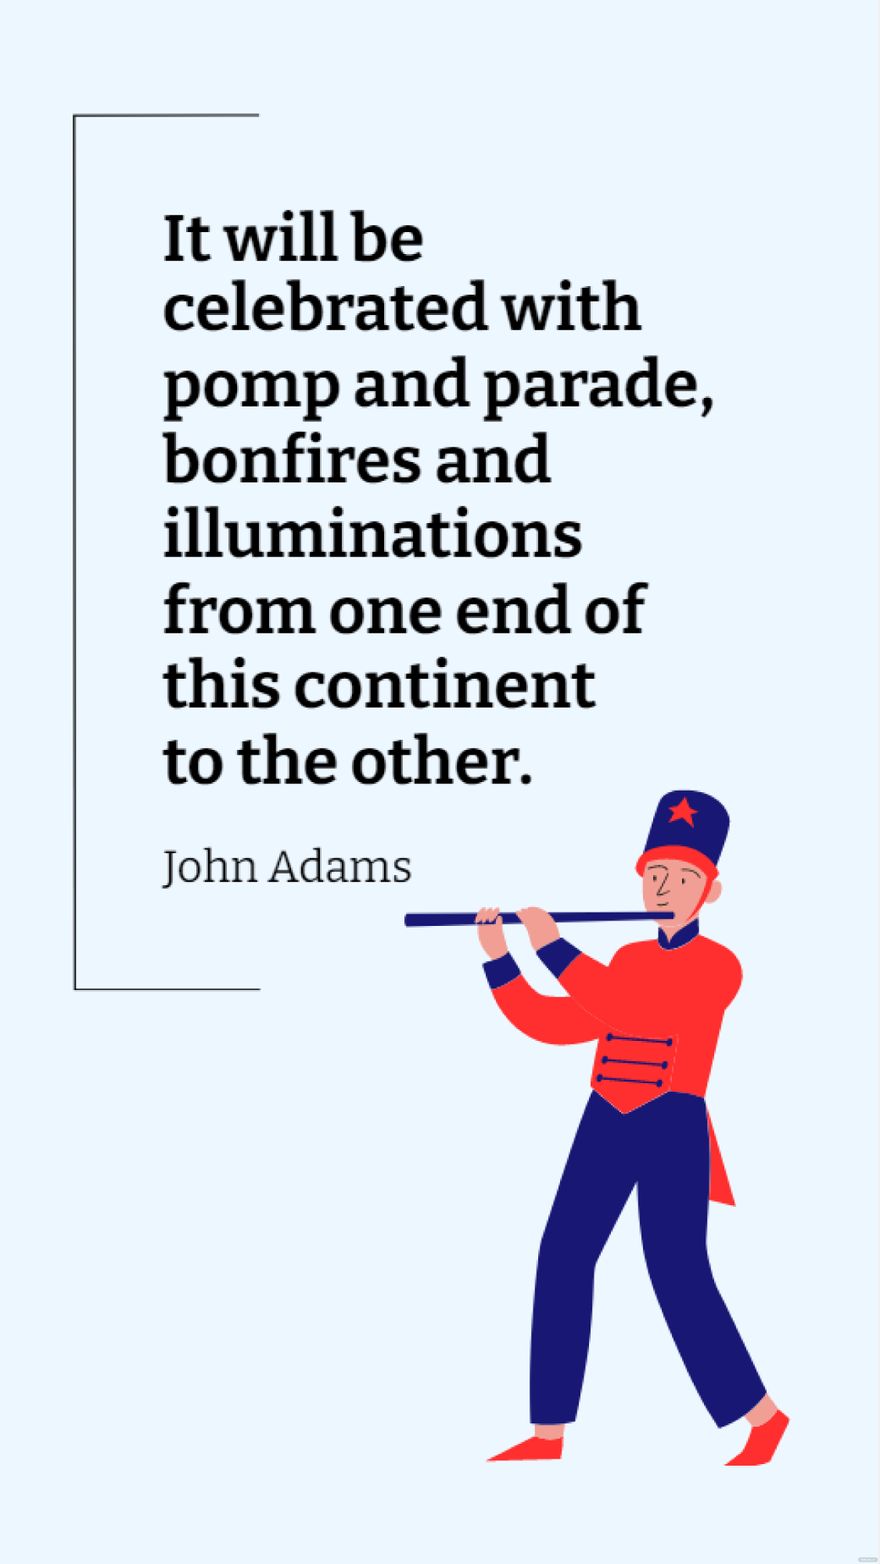 Free John Adams - It will be celebrated with pomp and parade, bonfires and illuminations from one end of this continent to the other. in JPG